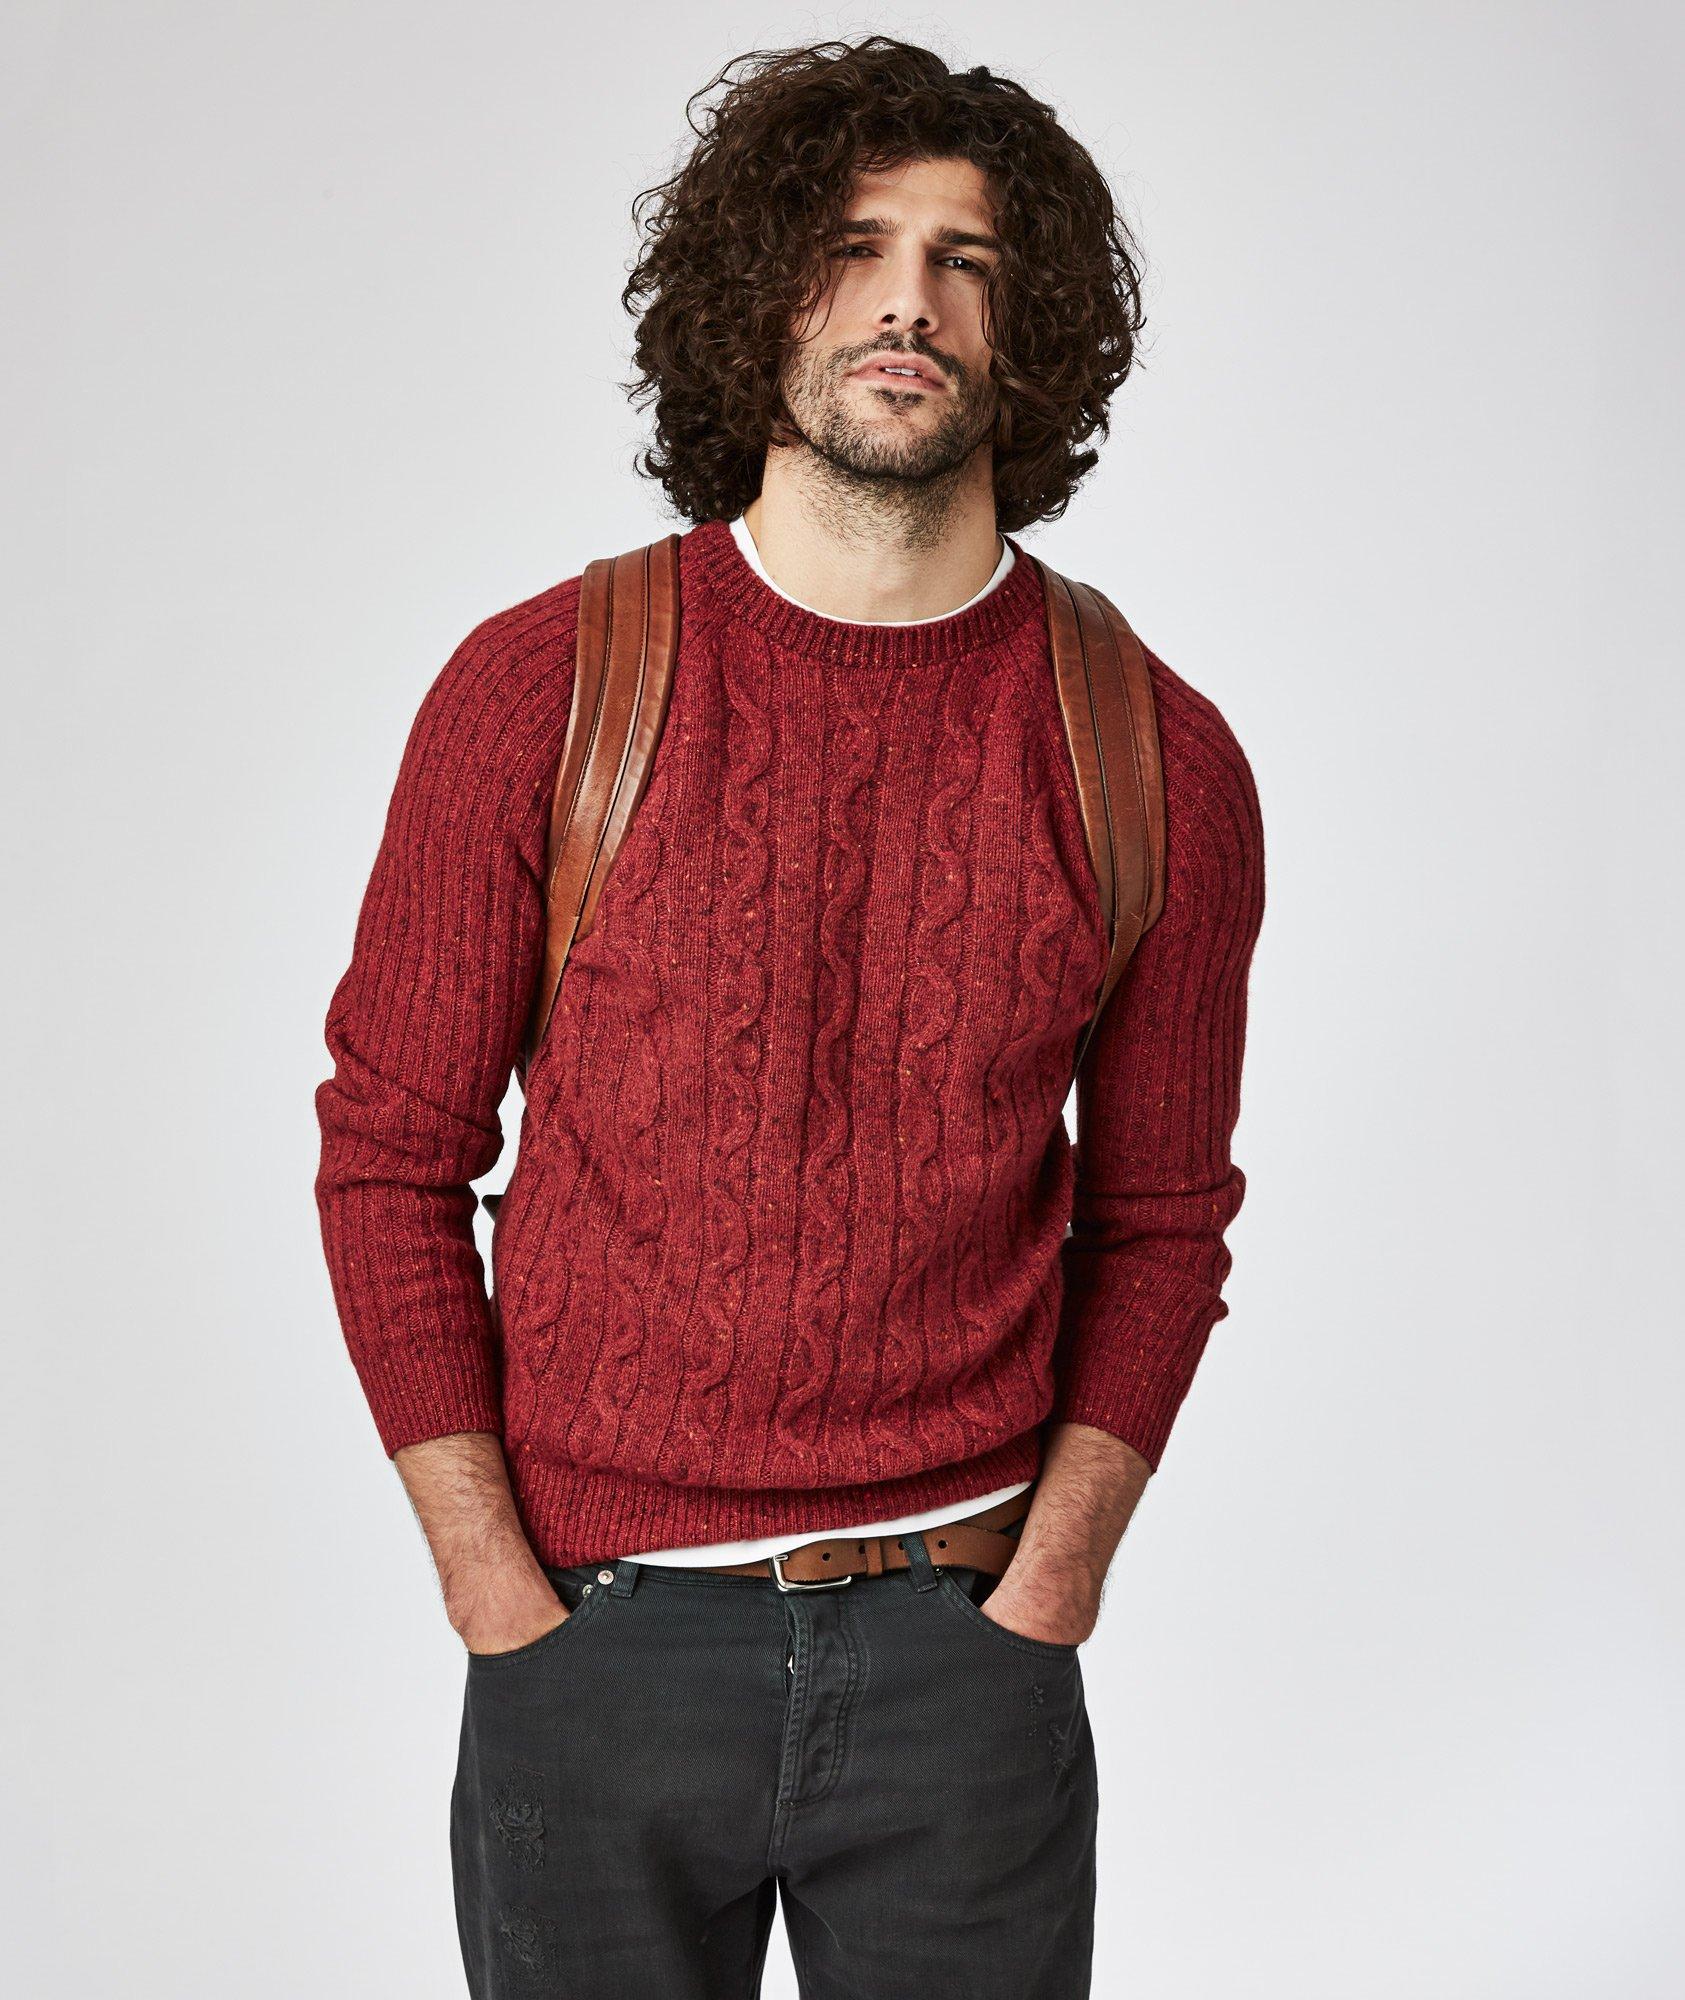 Cashmere Blend Cable-Knit Sweater image 0